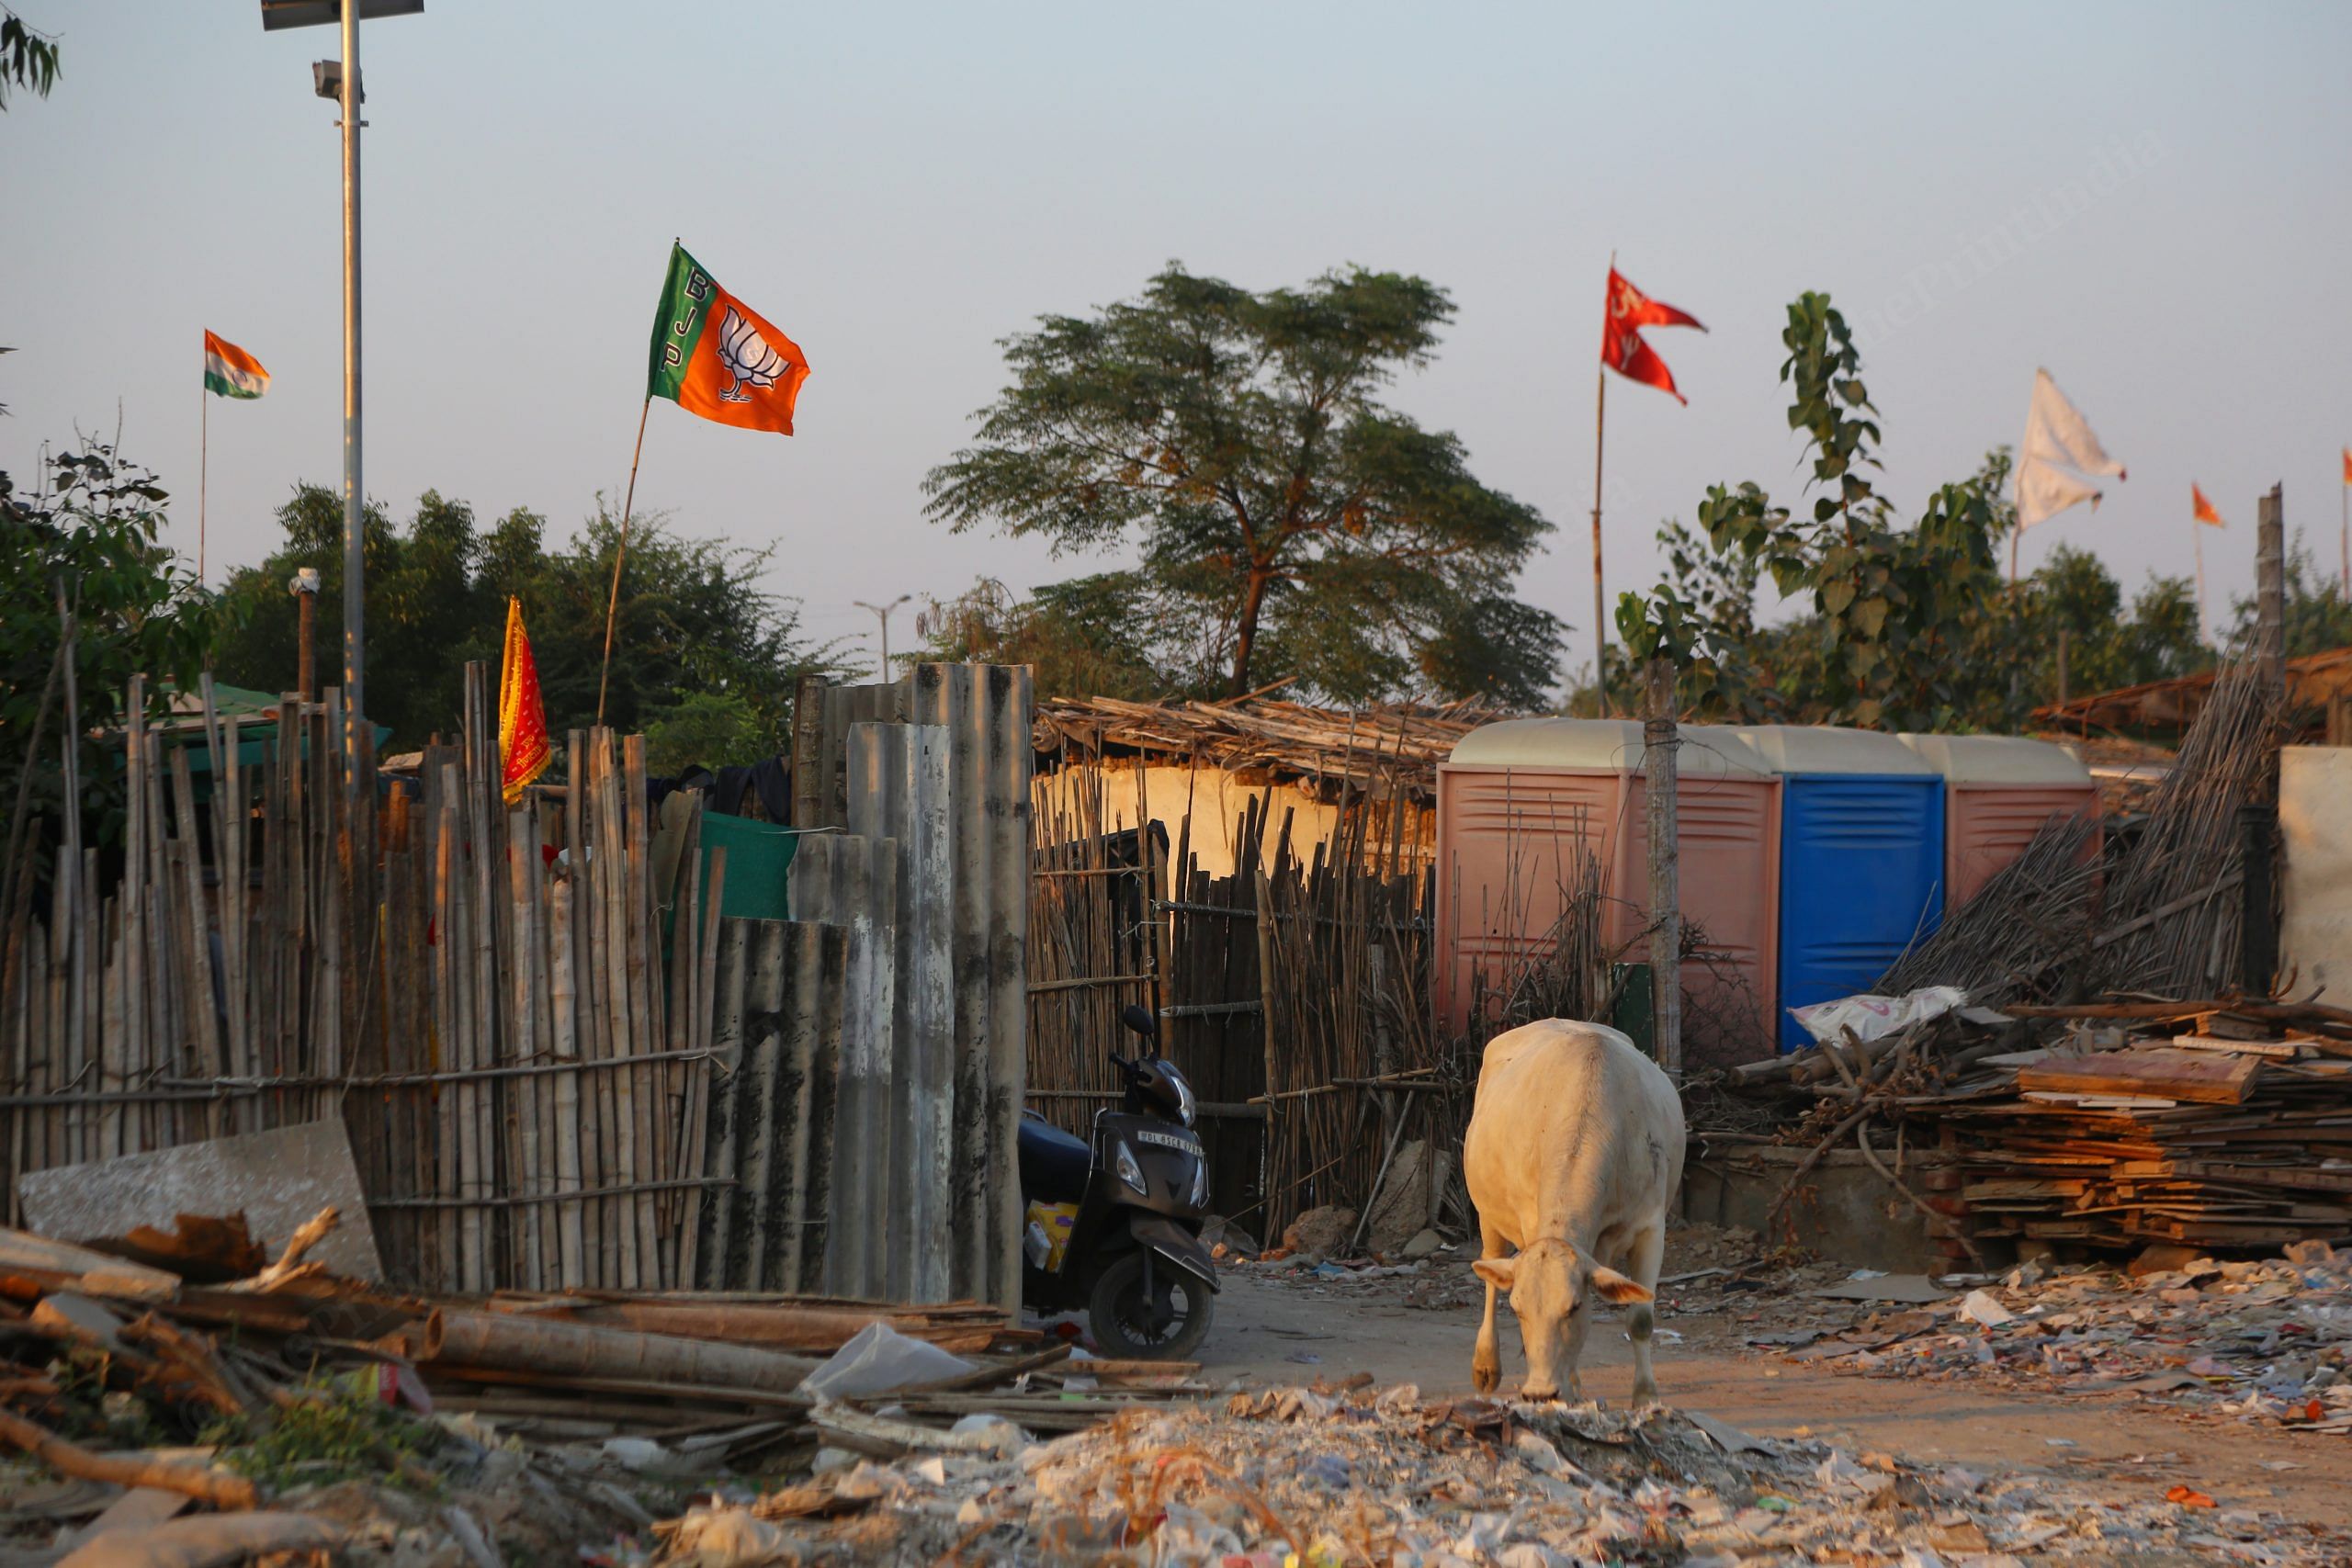 There are BJP flags in the settlement | Manisha Mondal, ThePrint